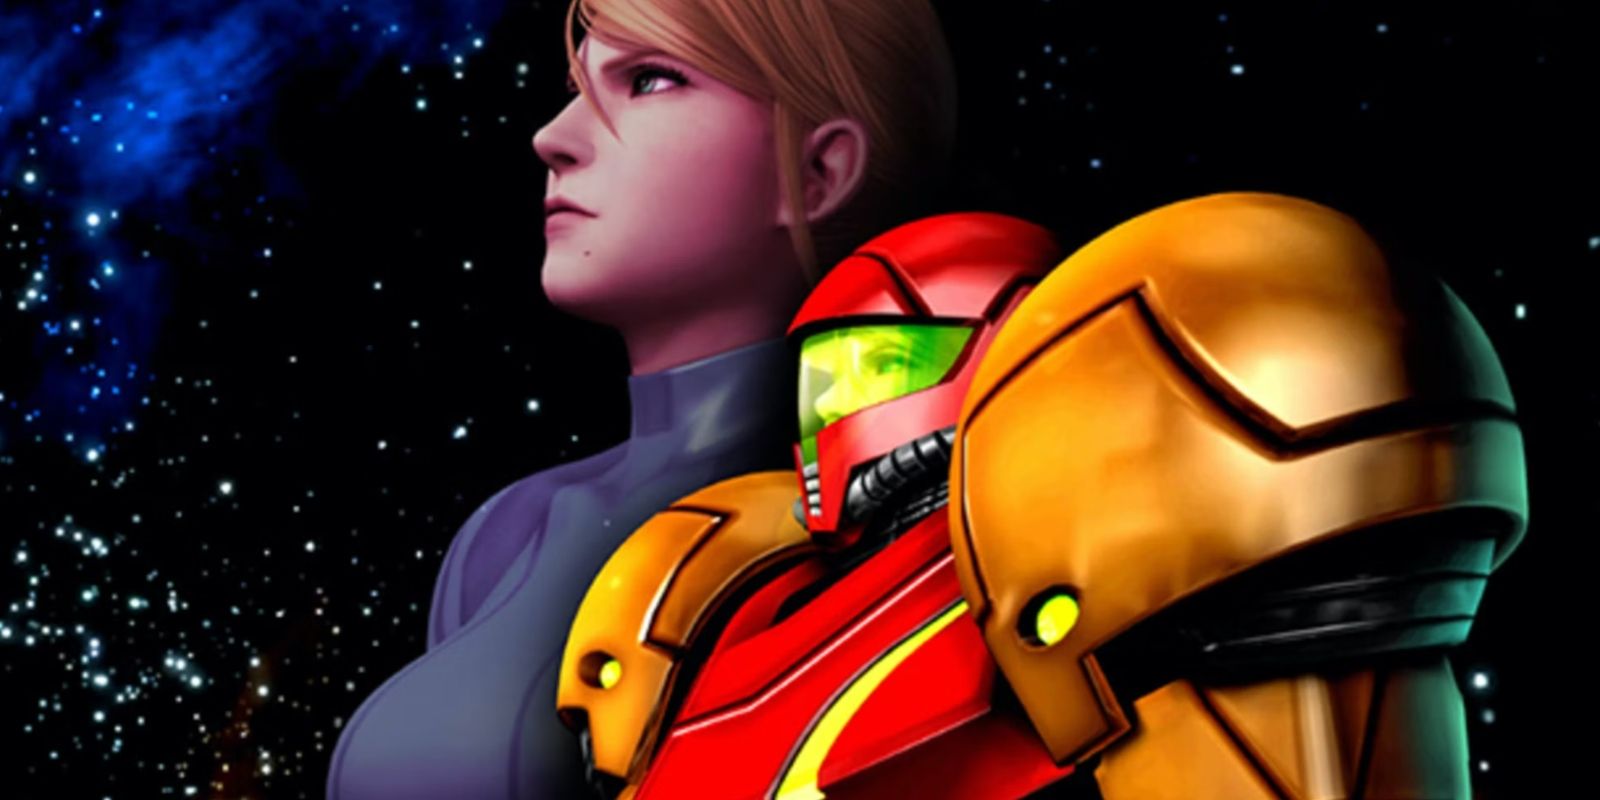 Samus gazing into space in her zero and Varia suits.